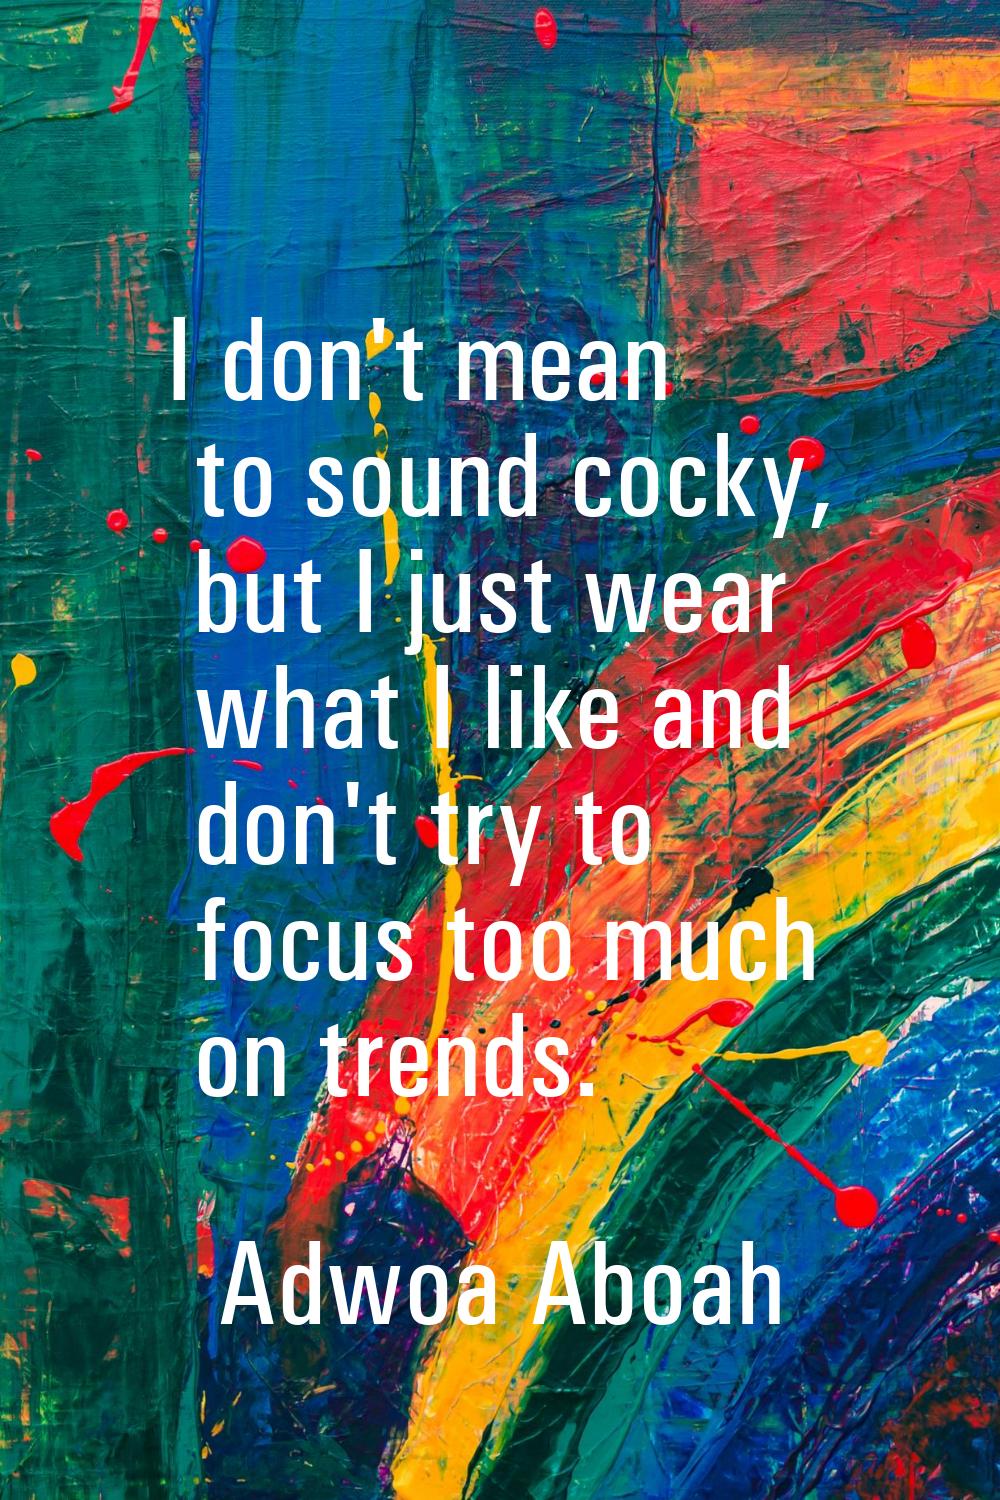 I don't mean to sound cocky, but I just wear what I like and don't try to focus too much on trends.